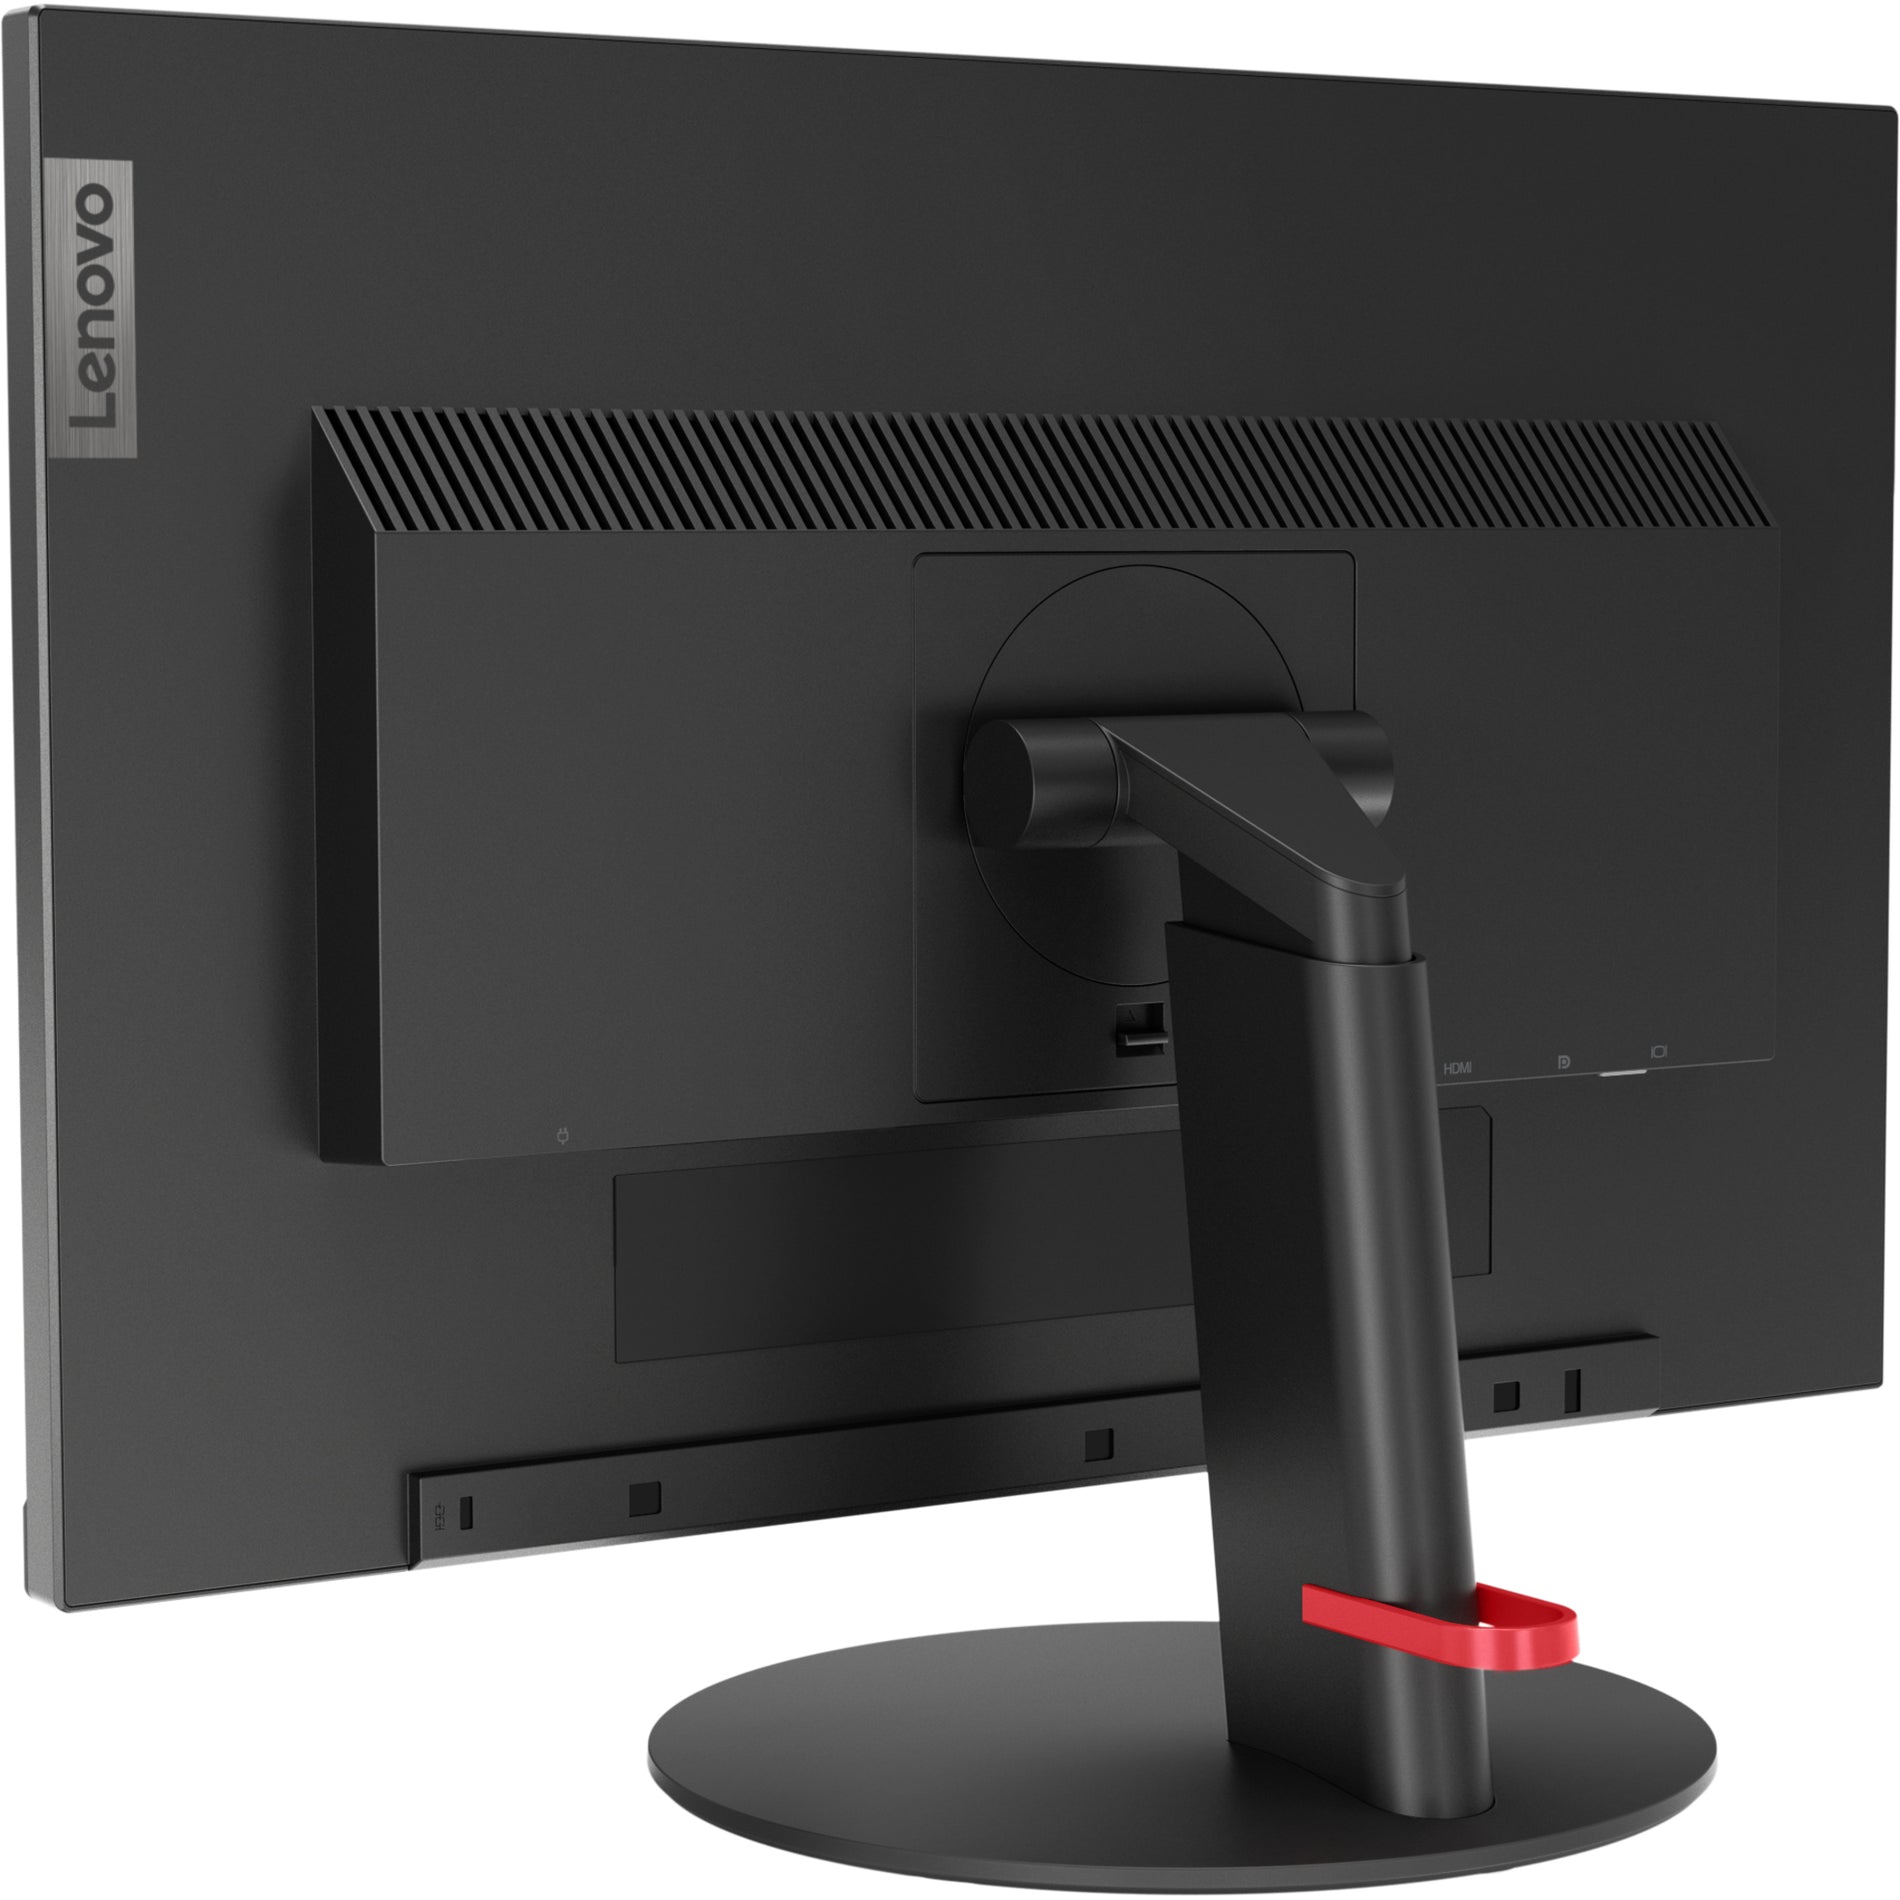 Lenovo ThinkVision T23d Widescreen LCD Monitor - 22.5" Display, 1920x1200 Resolution, HDMI, Black [Discontinued]